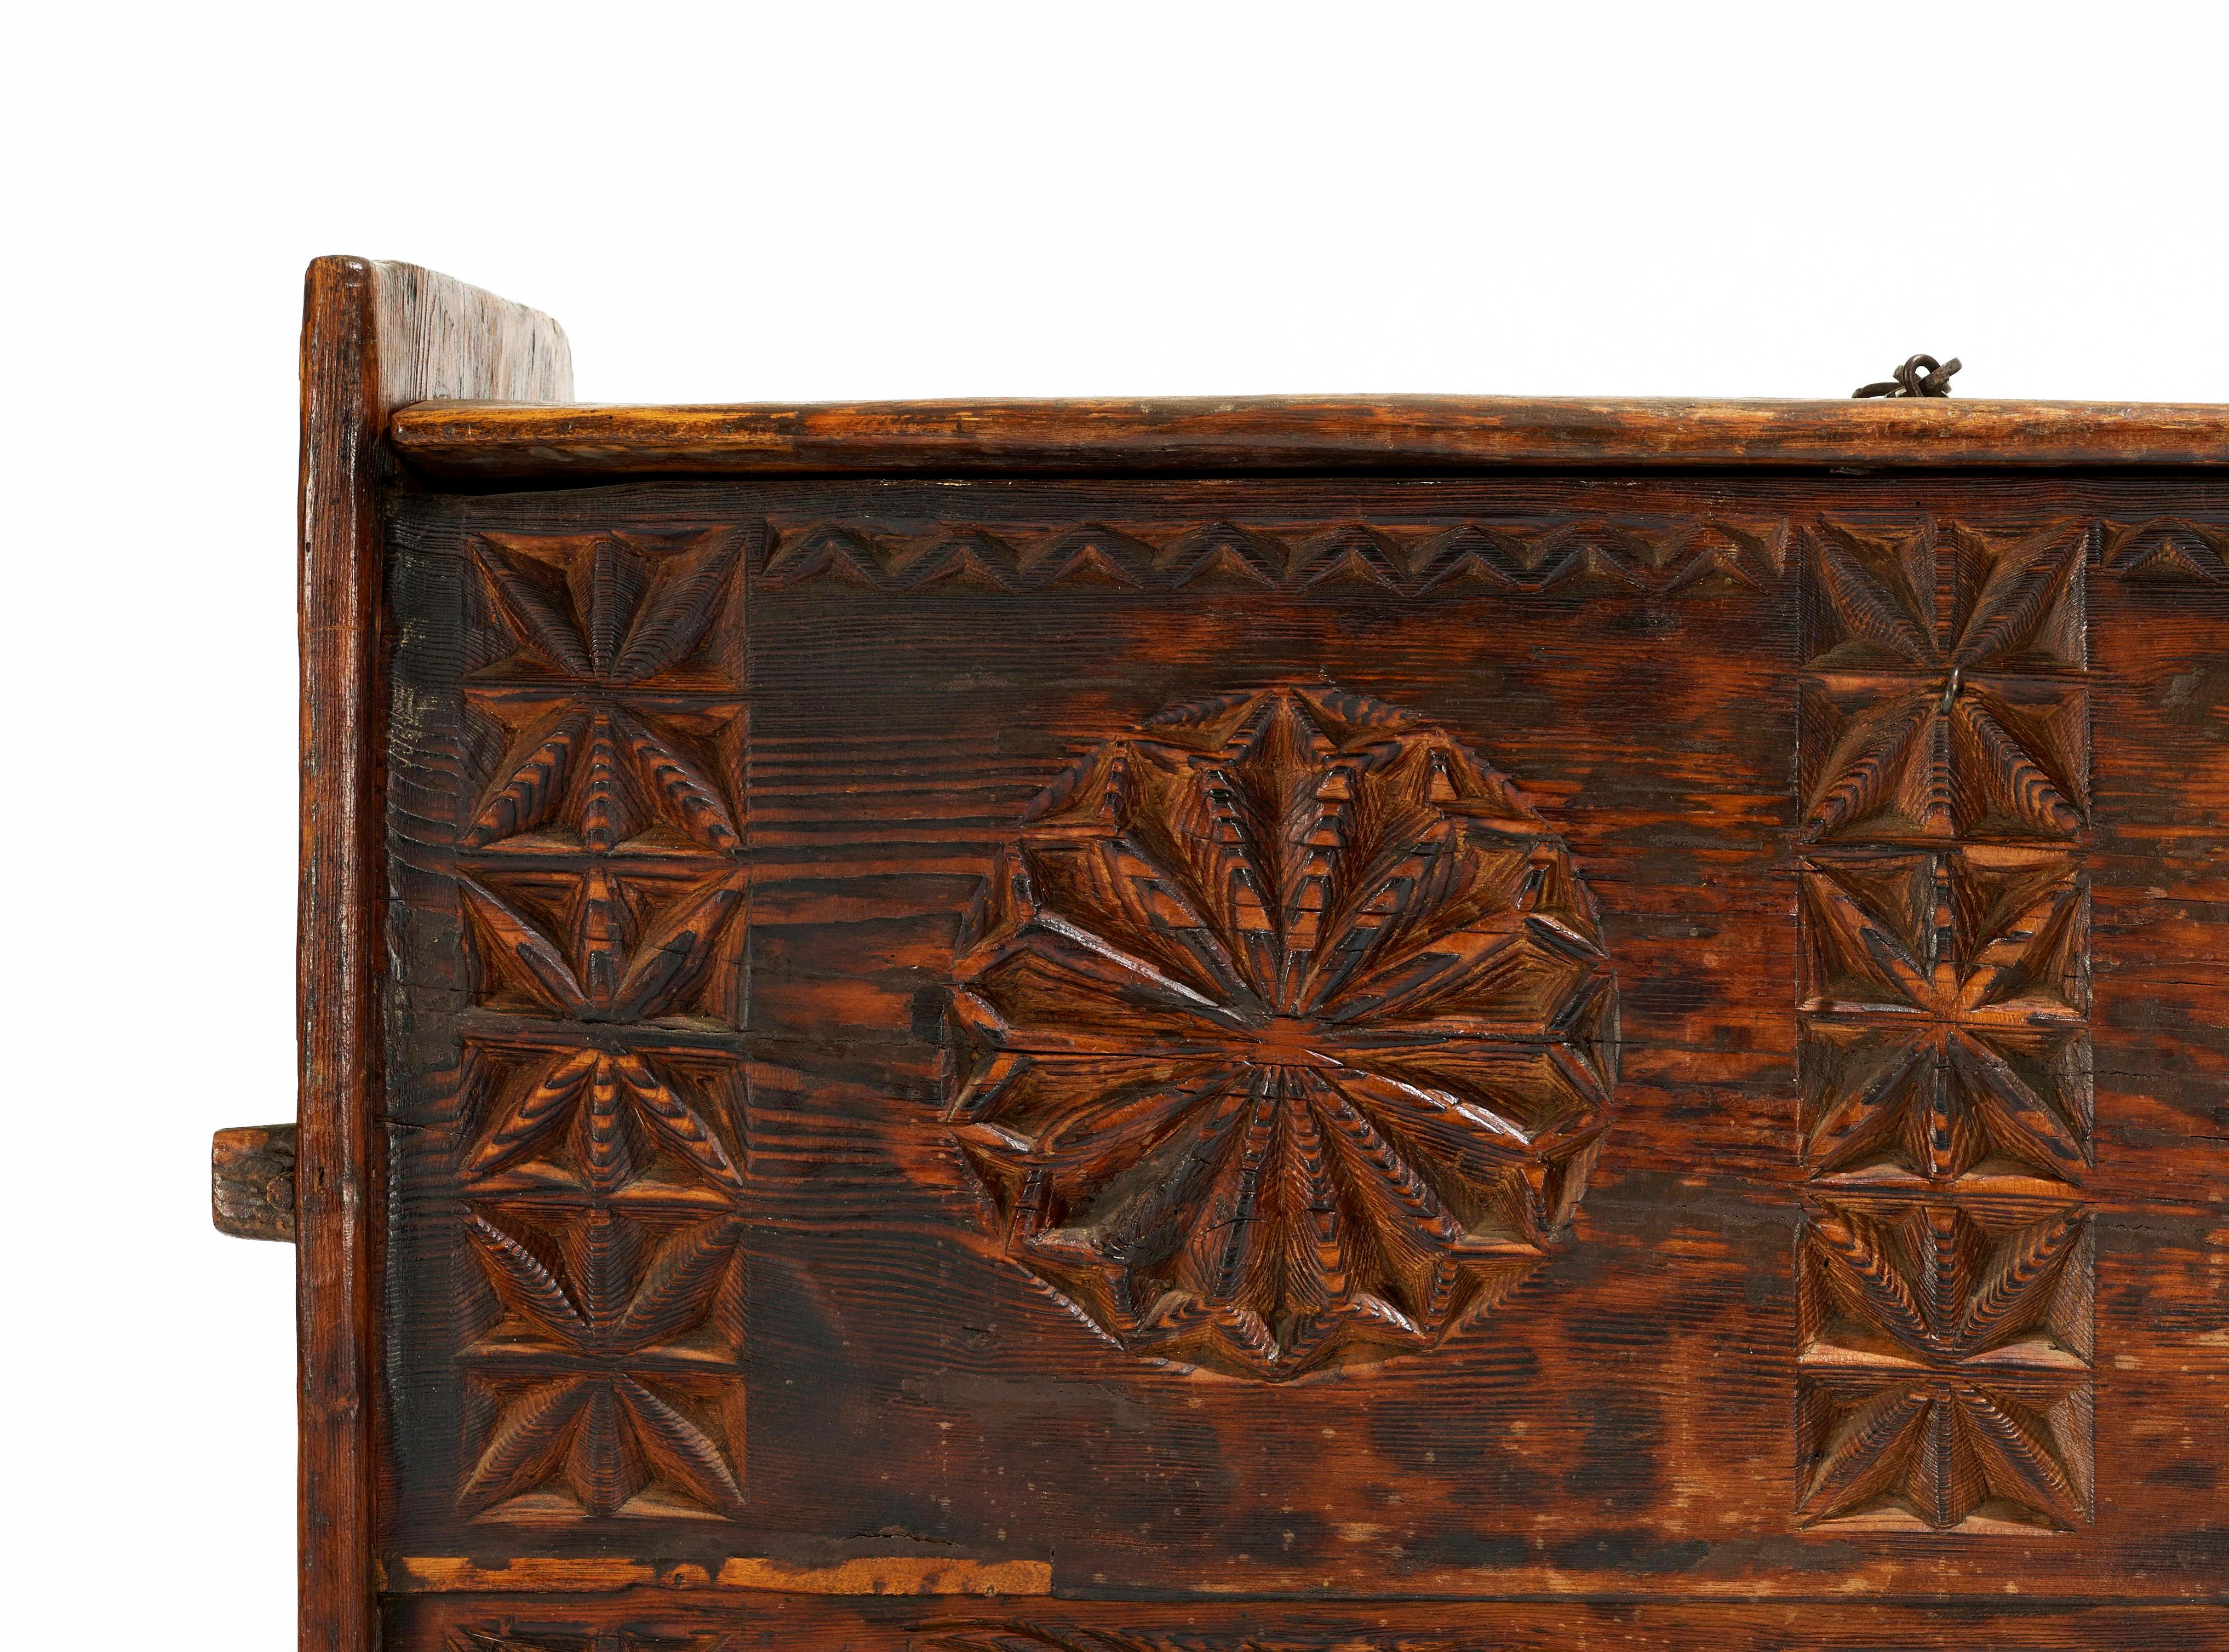 Modern Antique 'Star Anise' Hand Carved Dowry Textile Chest, Nuristan, Afghanistan